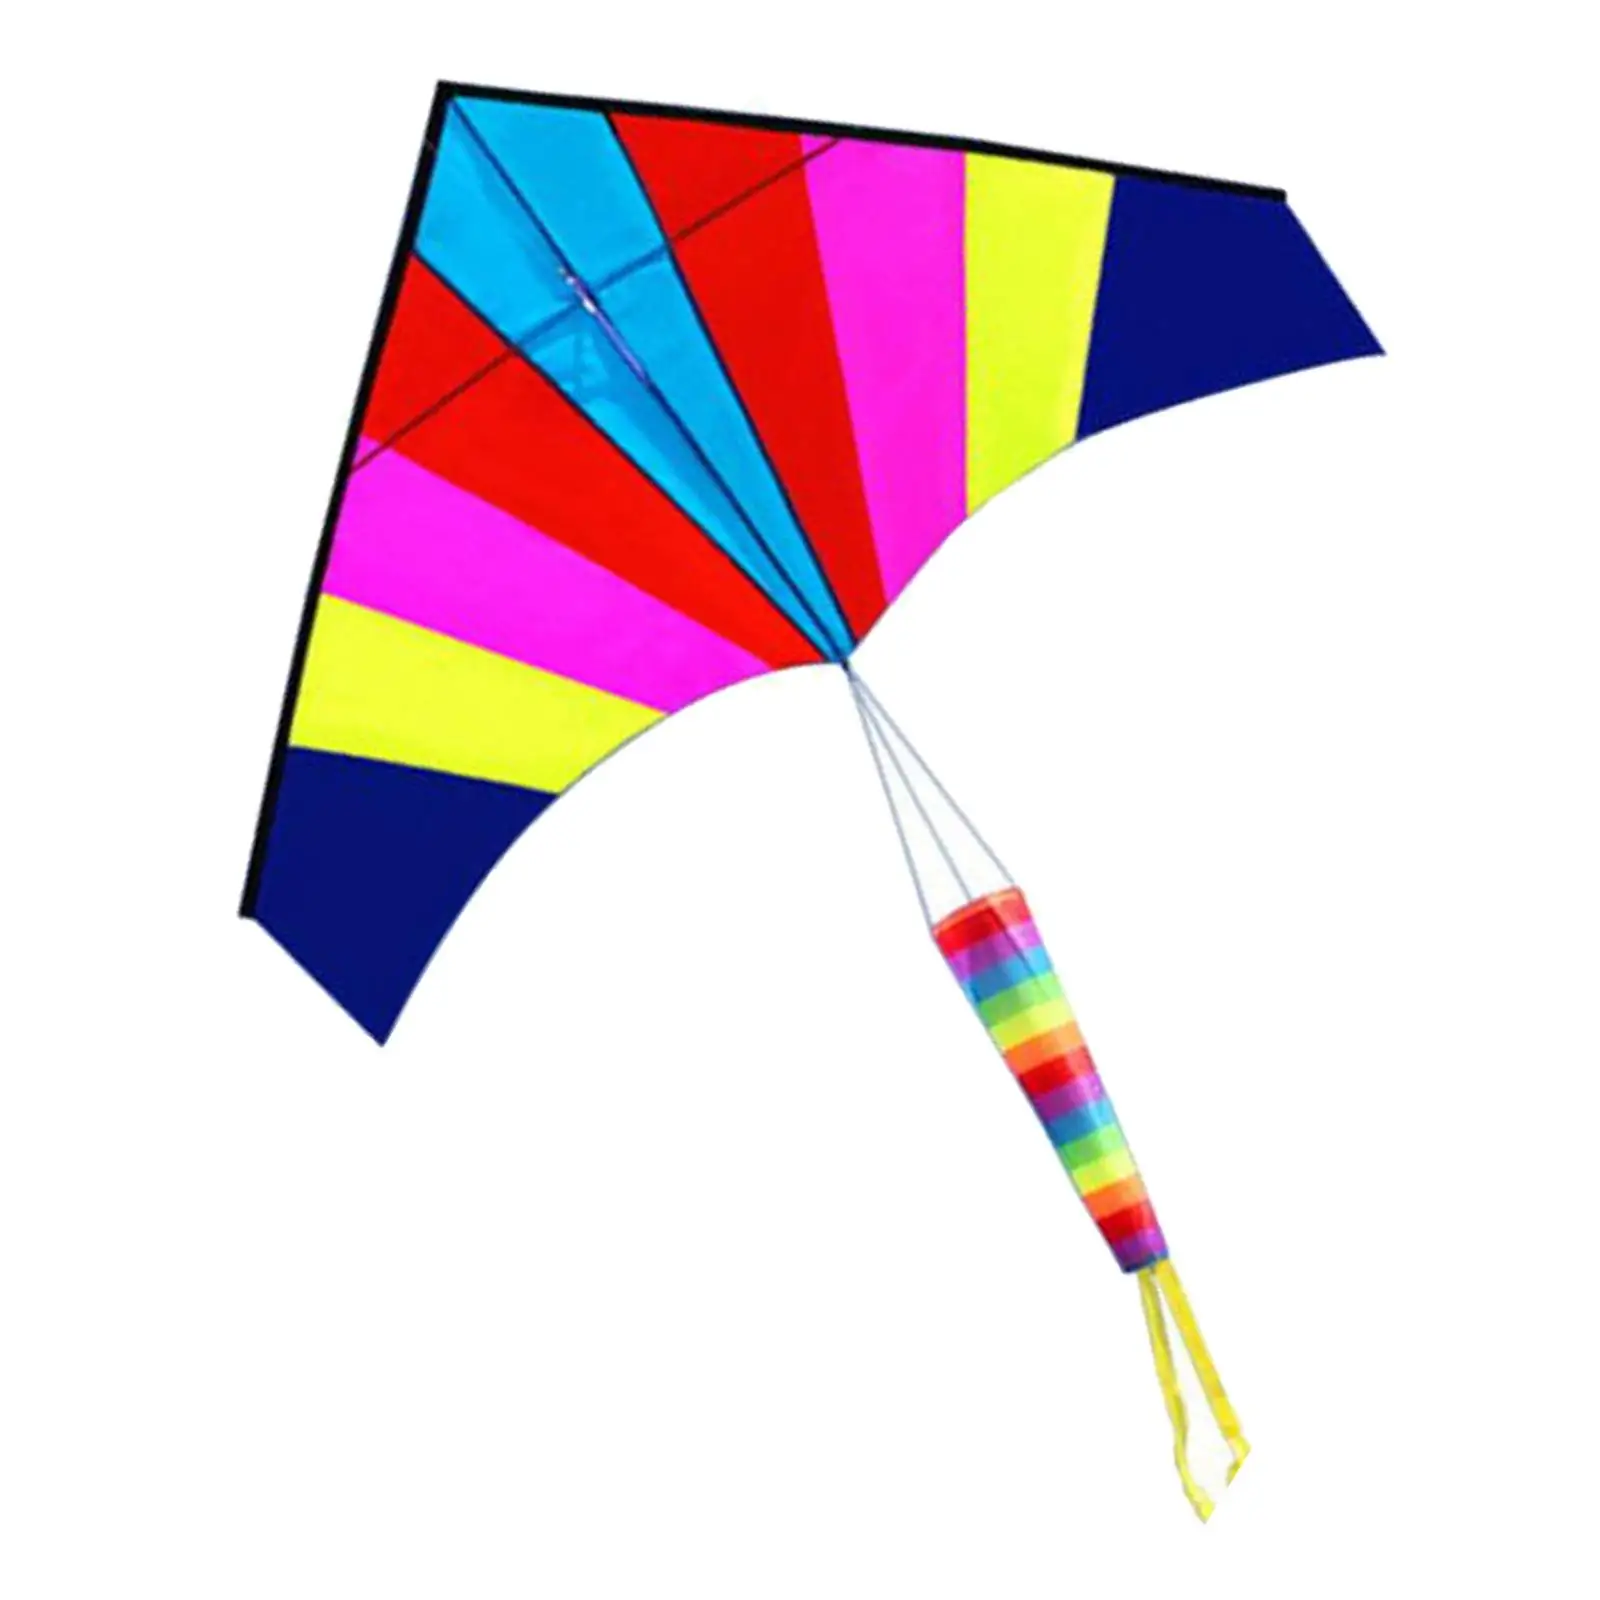 Colorful Delta Kite Triangle Kite Huge Windsock with Tail Giant for Outdoor Toy